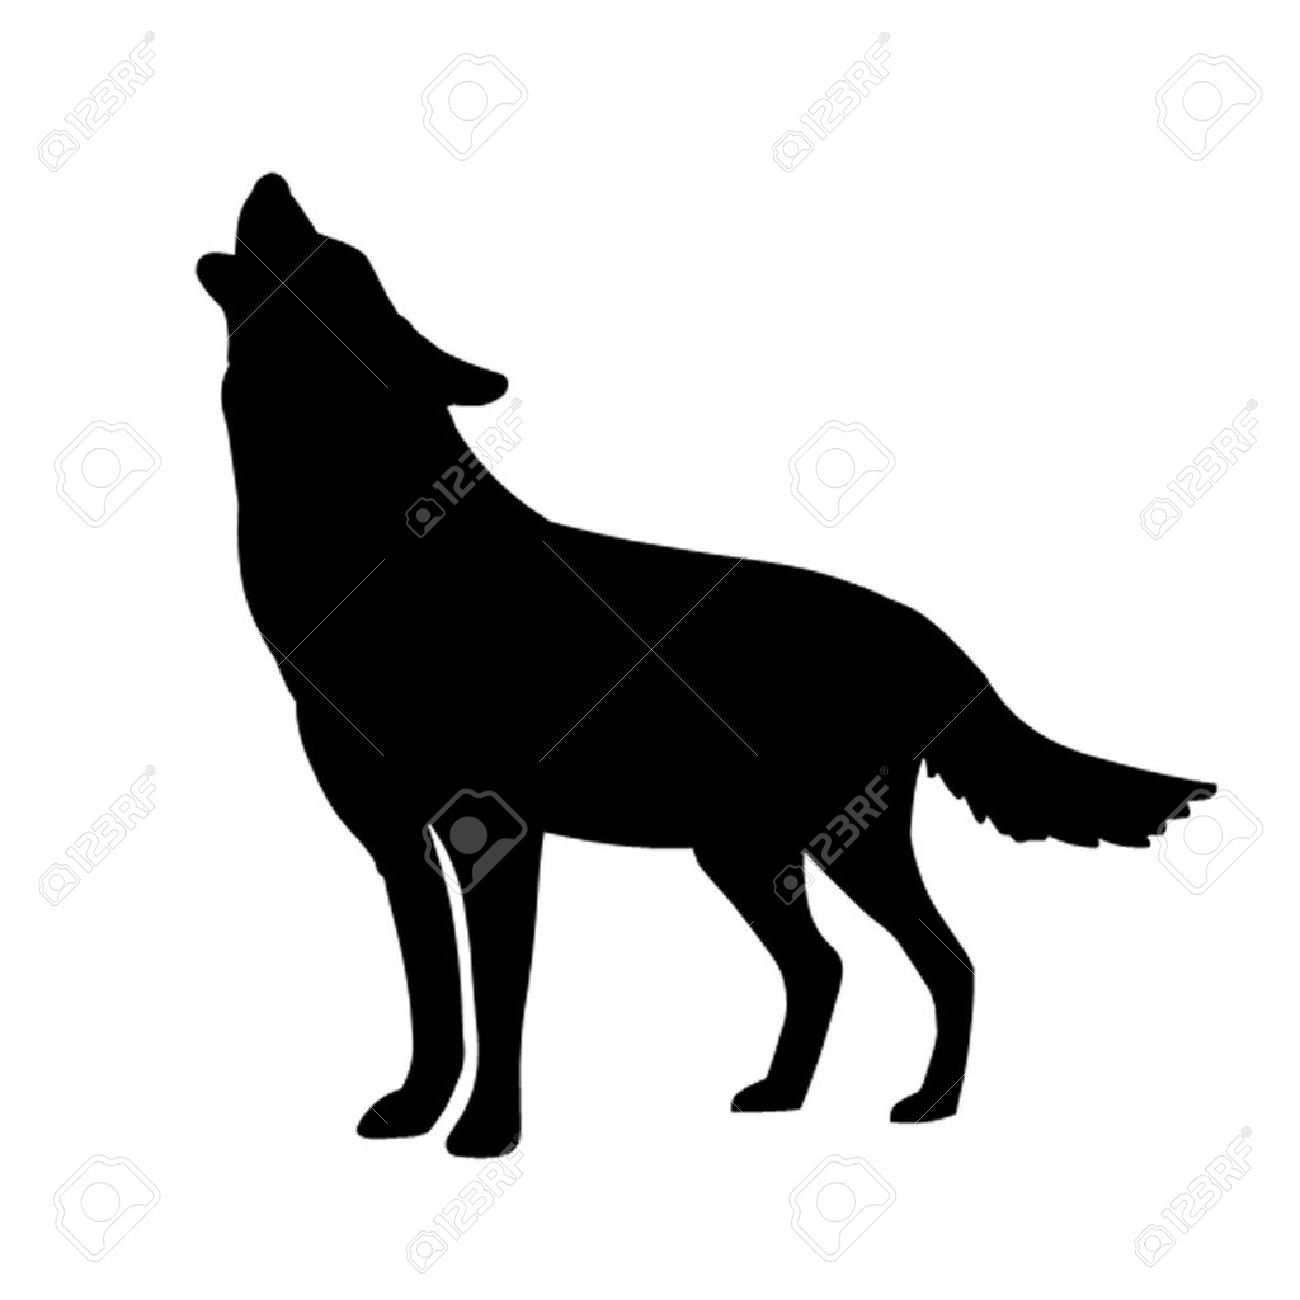 Howling Wolf Clipart